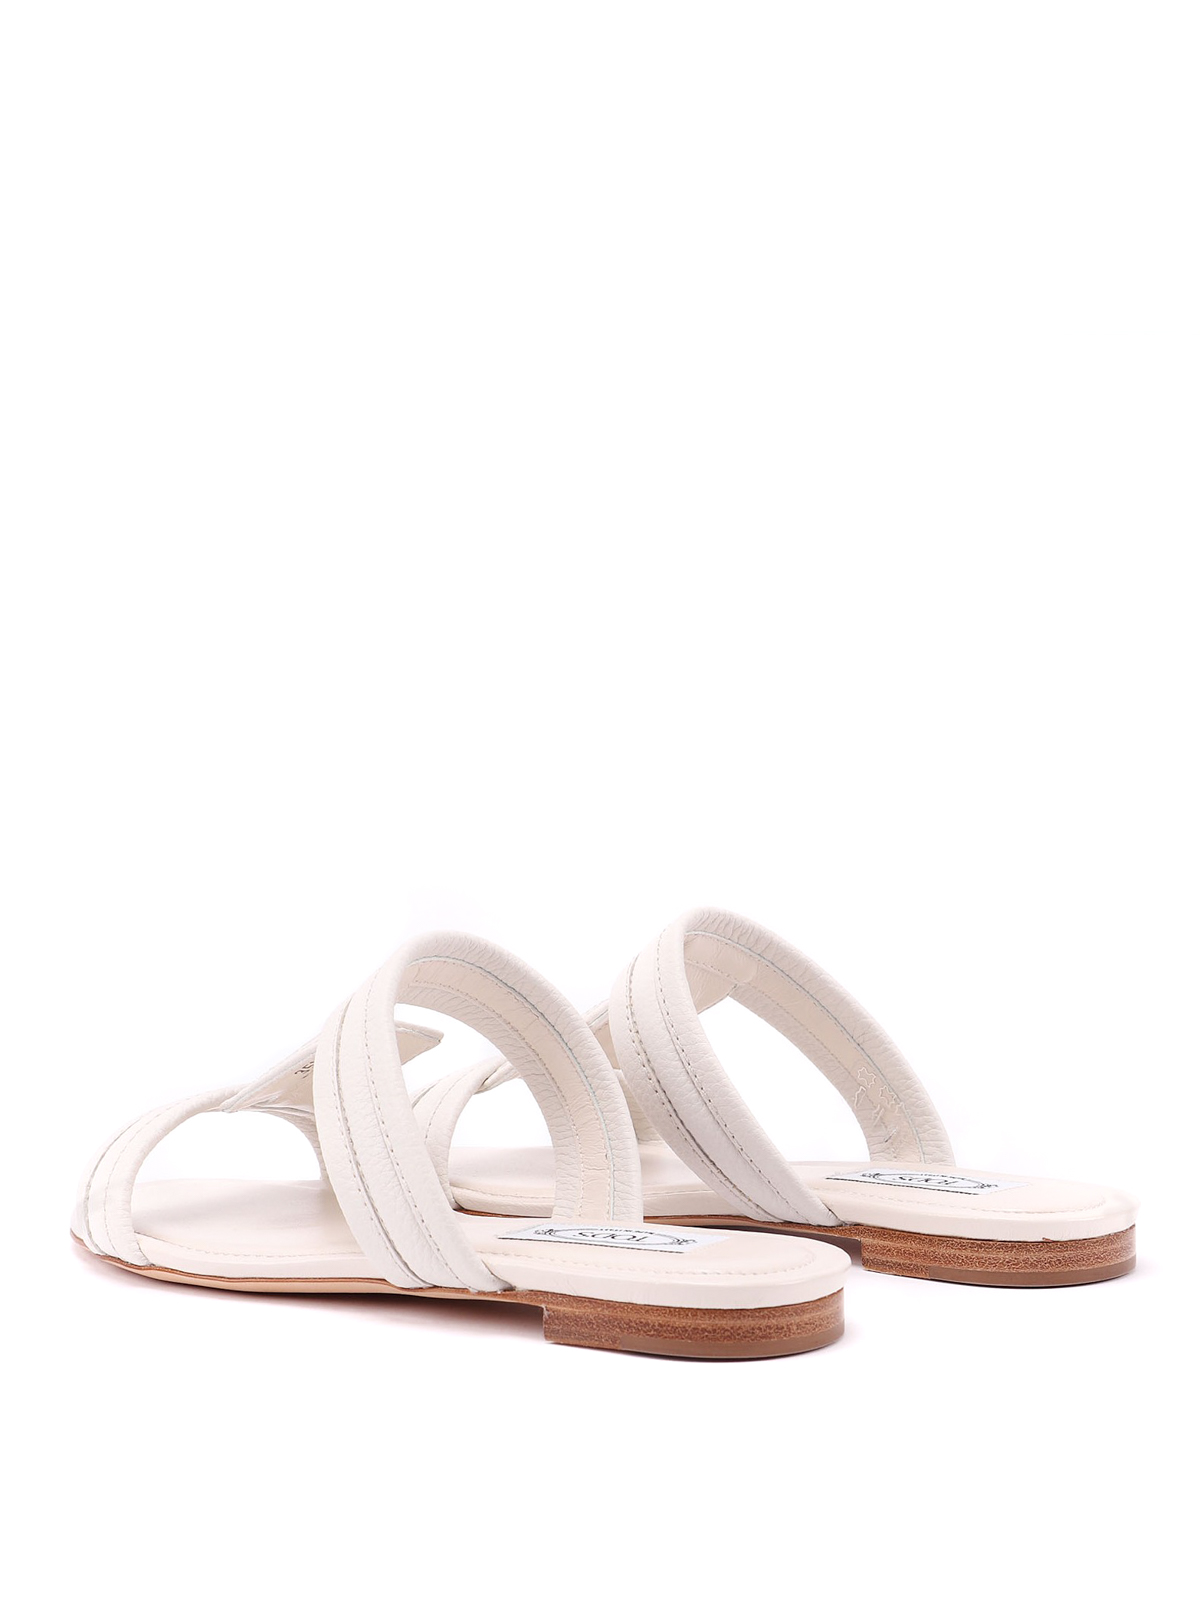 Tod'S - White suede leather sandals 